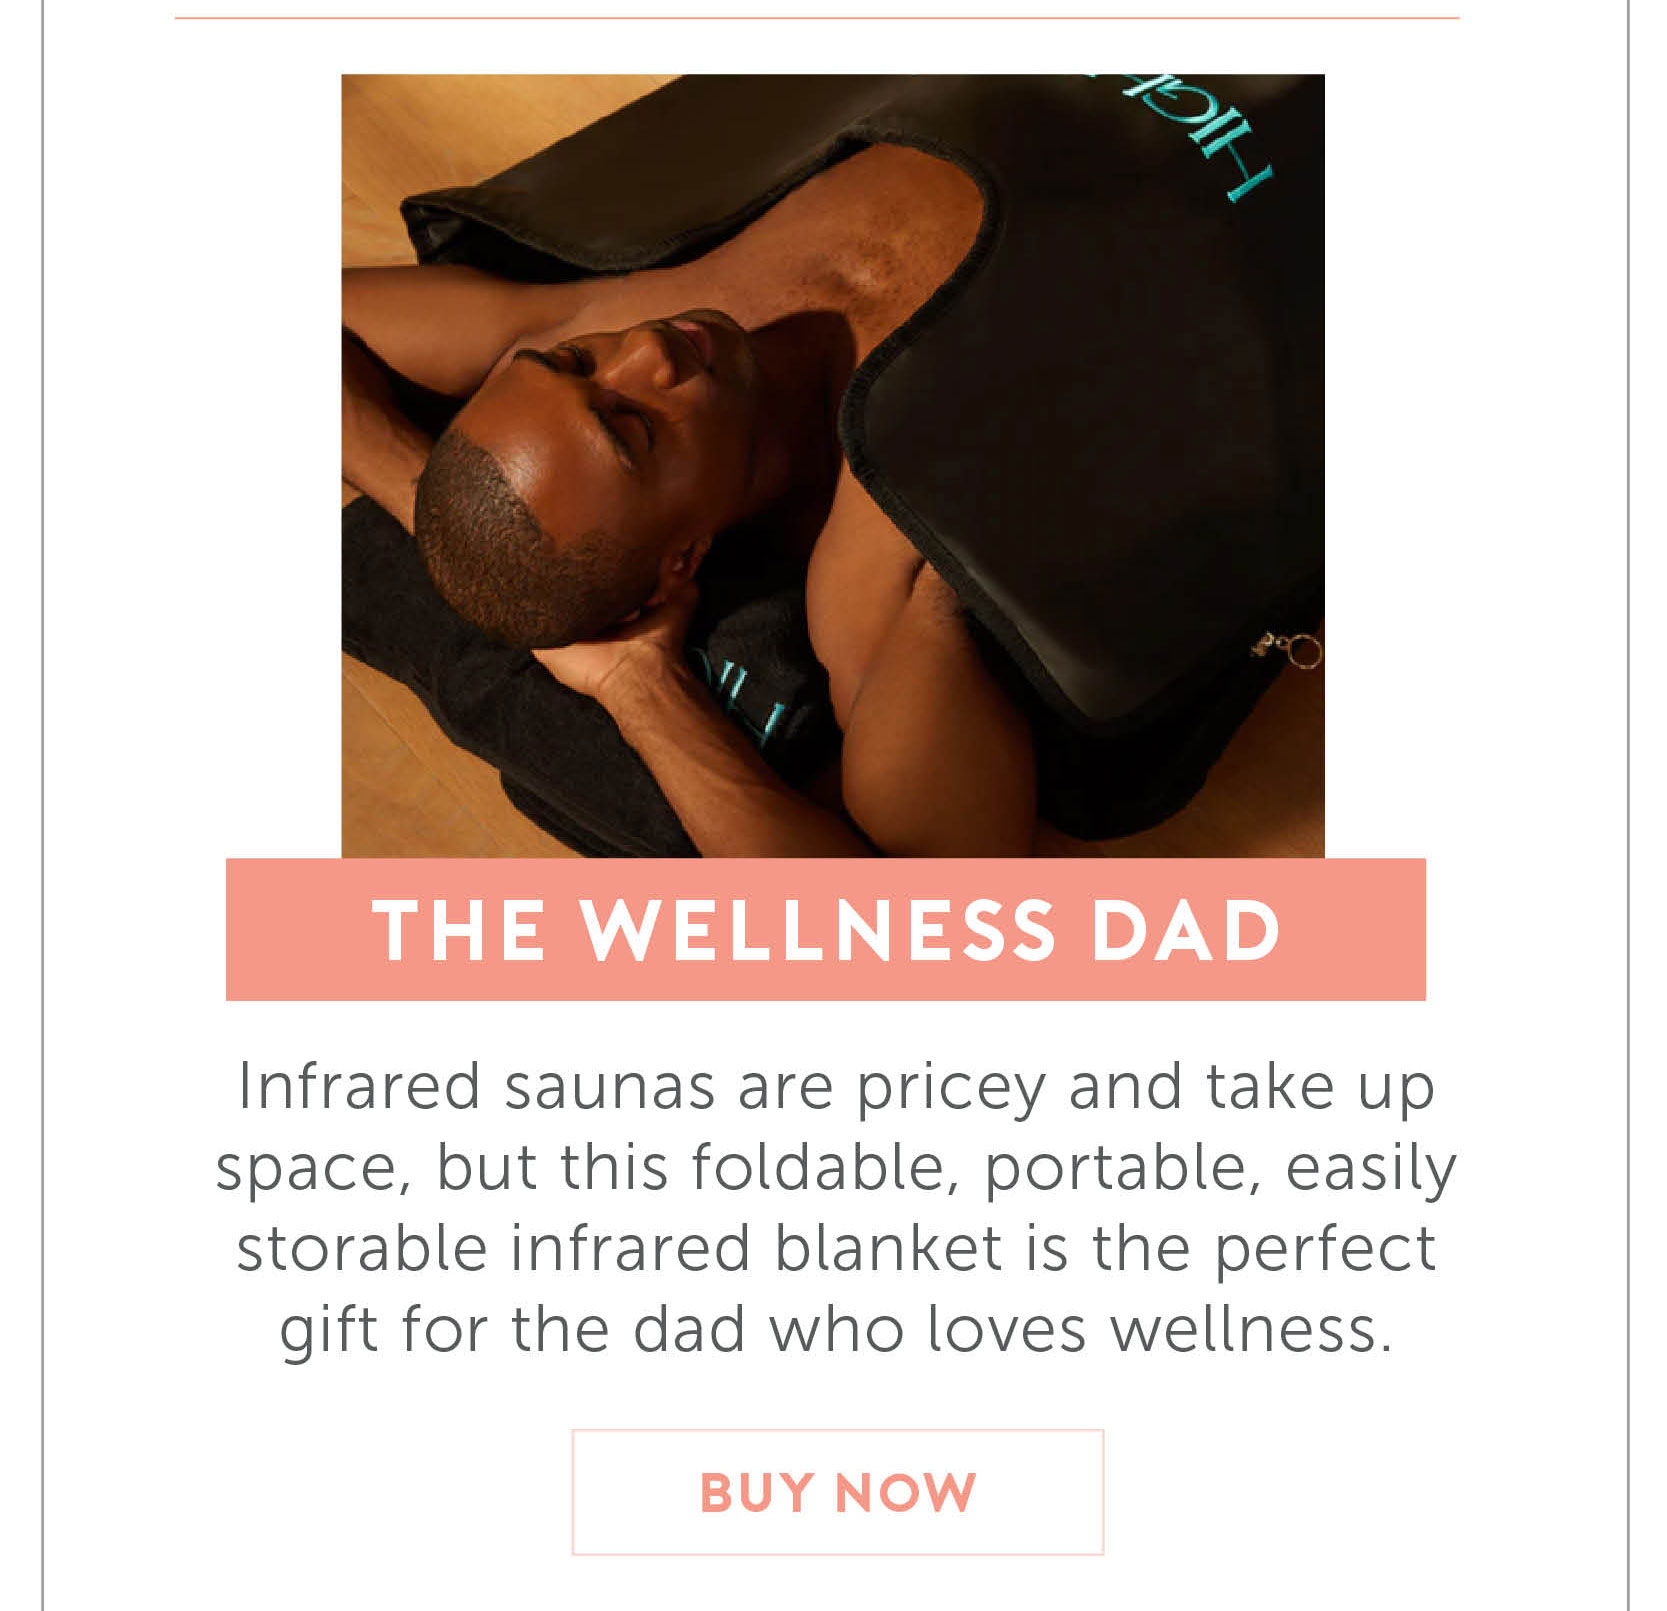 For the Wellness Dad. Infrared saunas are pricey and take up space, but this foldable, portable, and easily storable infrared blanket is the perfect gift for the dad who loves Wellness.